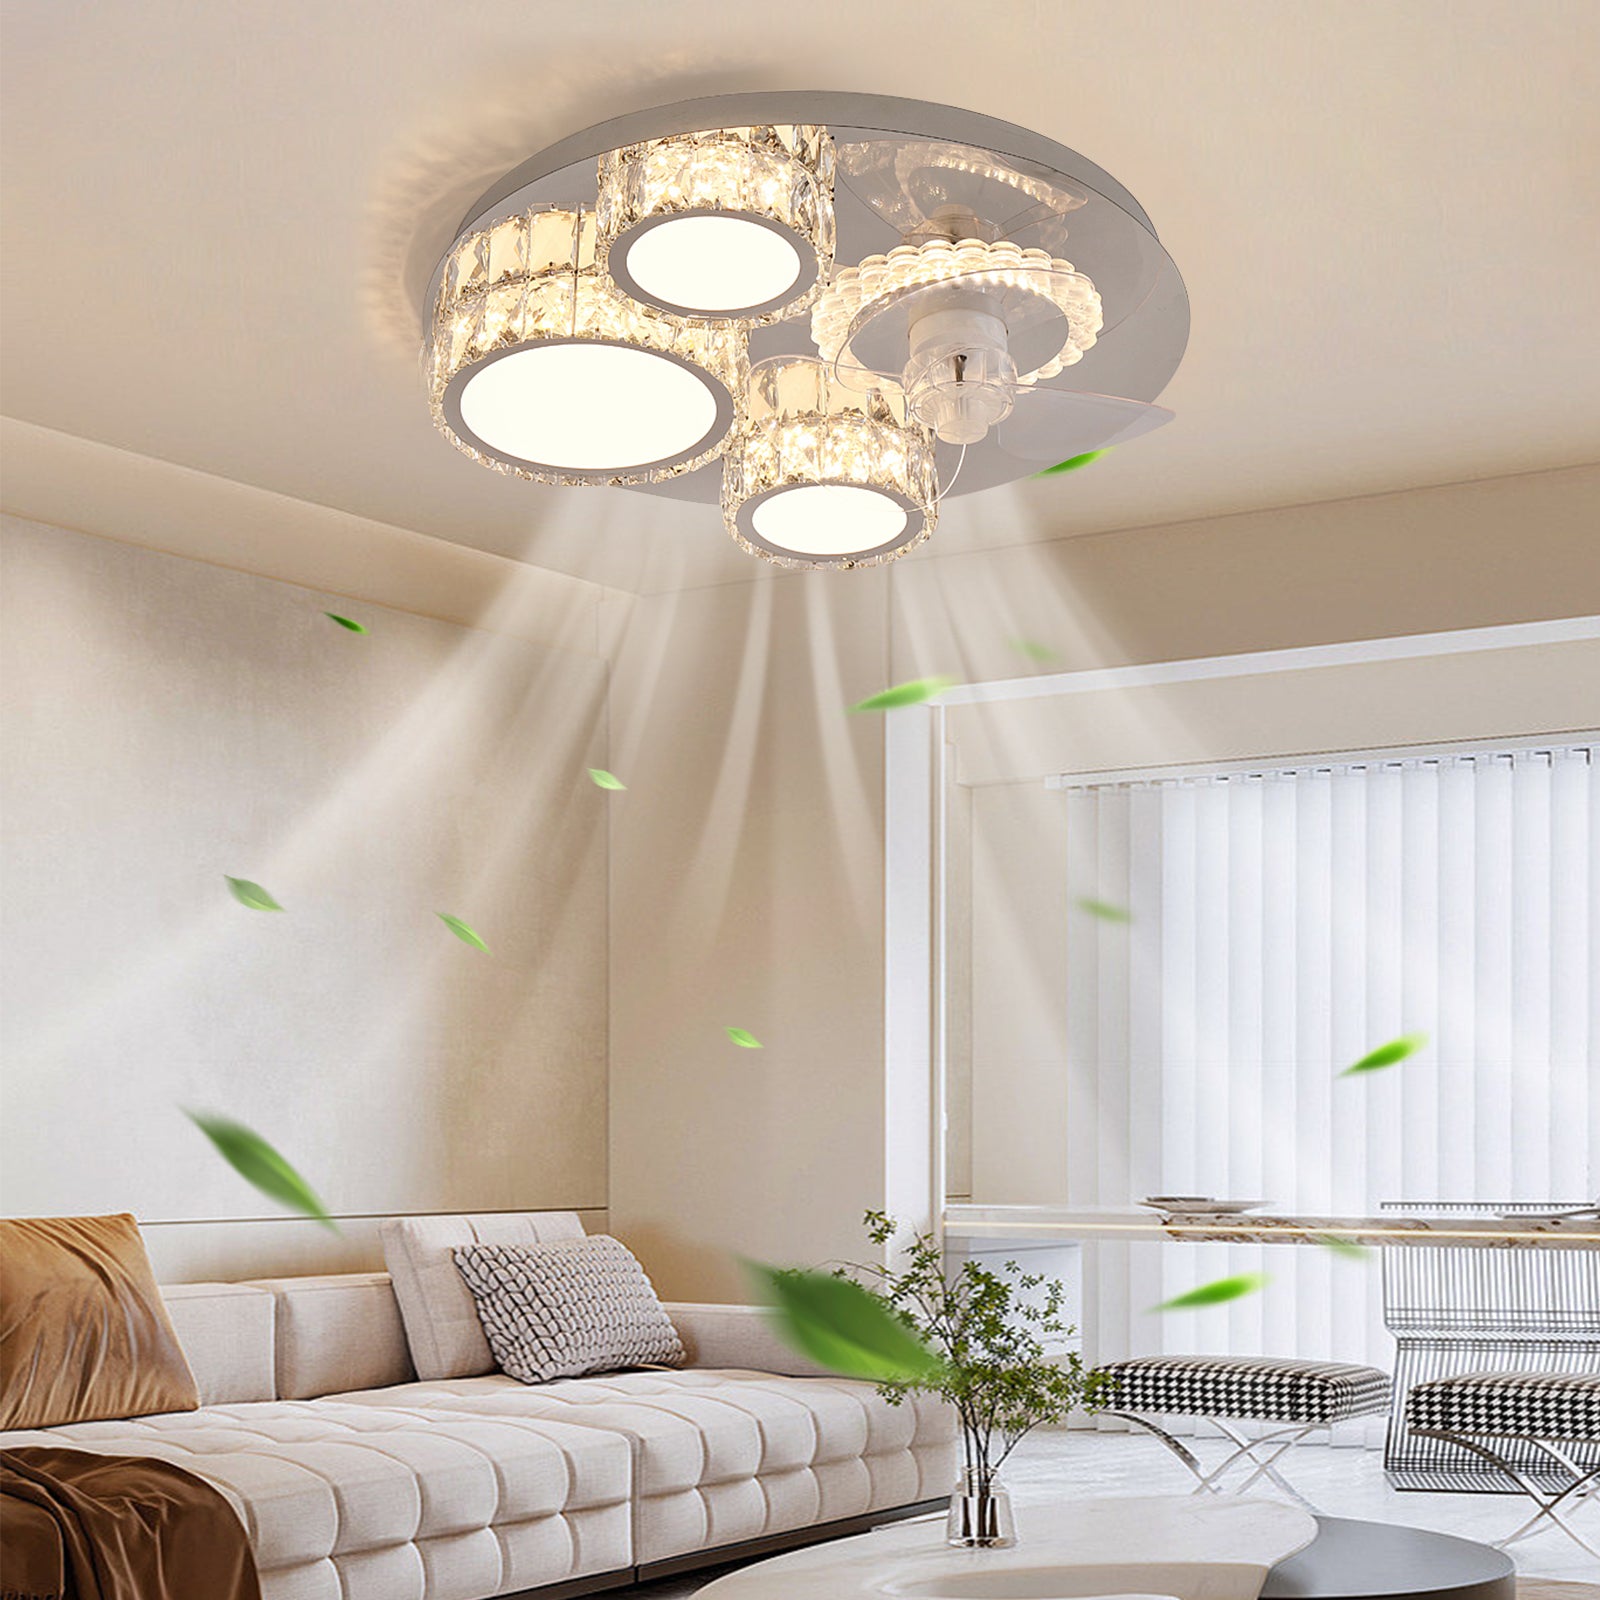 REYDELUZ 19" Crystal Ceiling Fans with Lights,LED 3 Color Remote Control Invisible Blades 6 Speeds Indoor Ceiling Light Kits with Fans for Decorate Small Bedroom